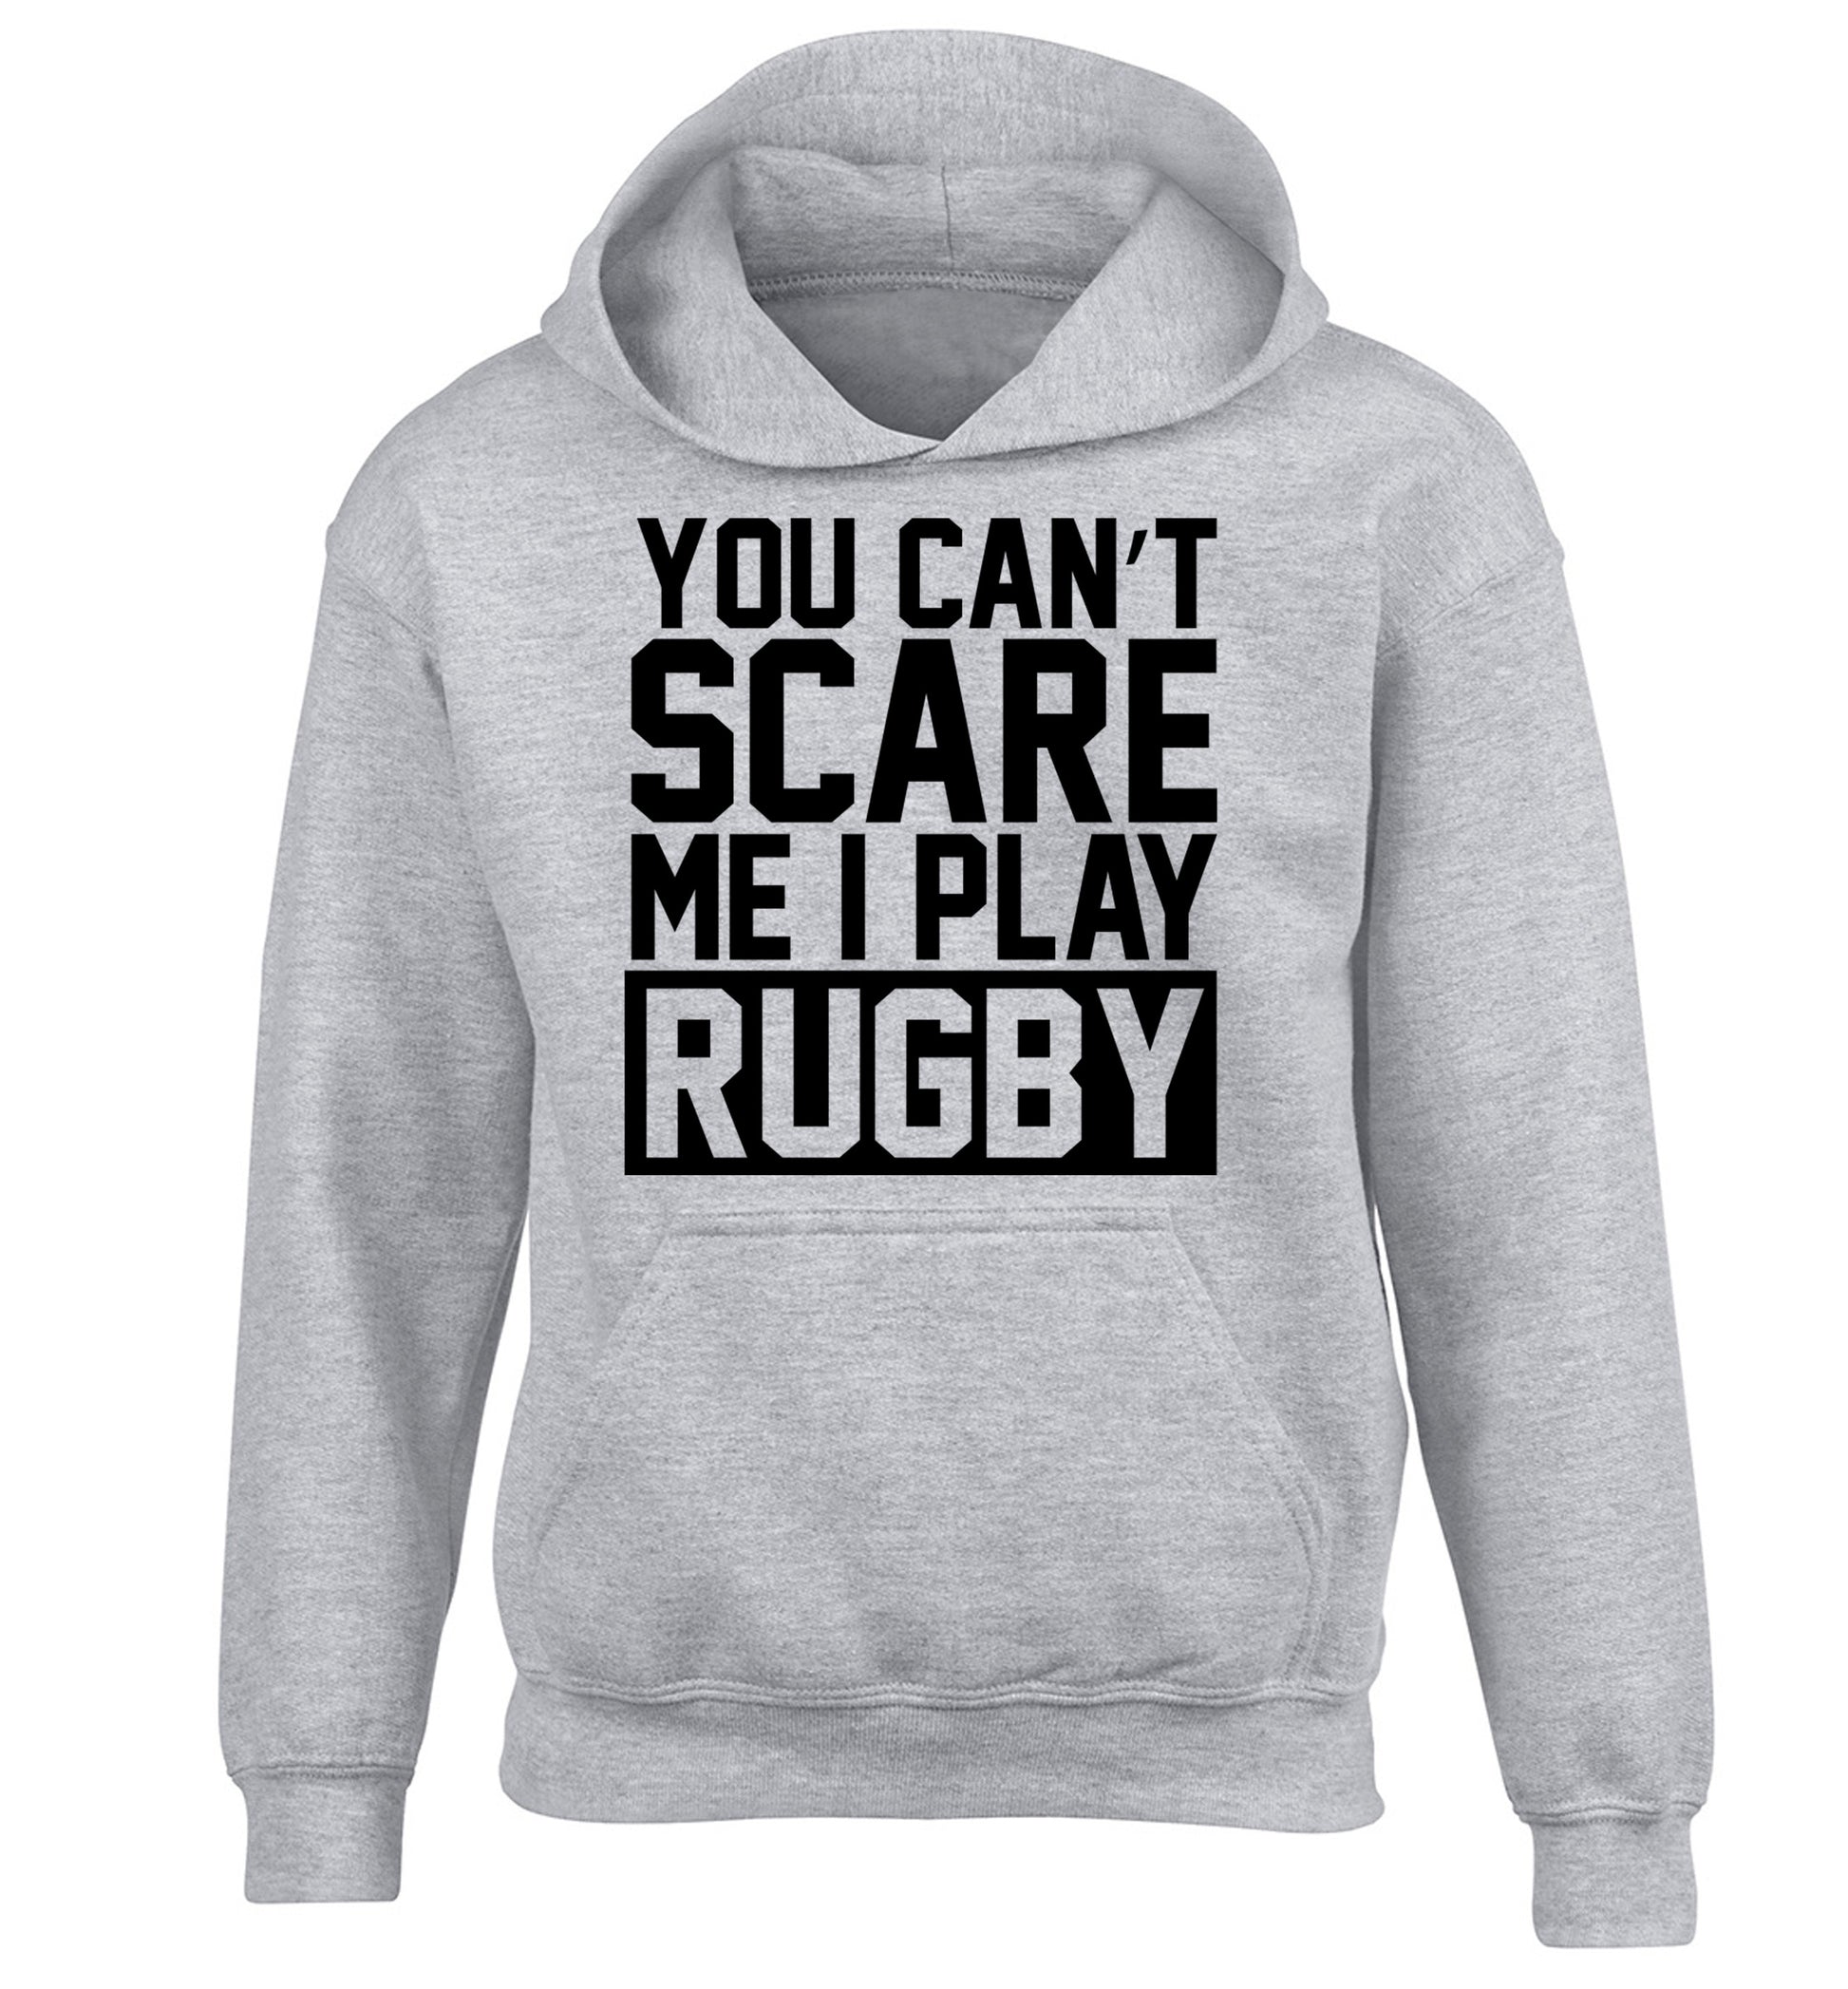 You can't scare me I play rugby children's grey hoodie 12-14 Years